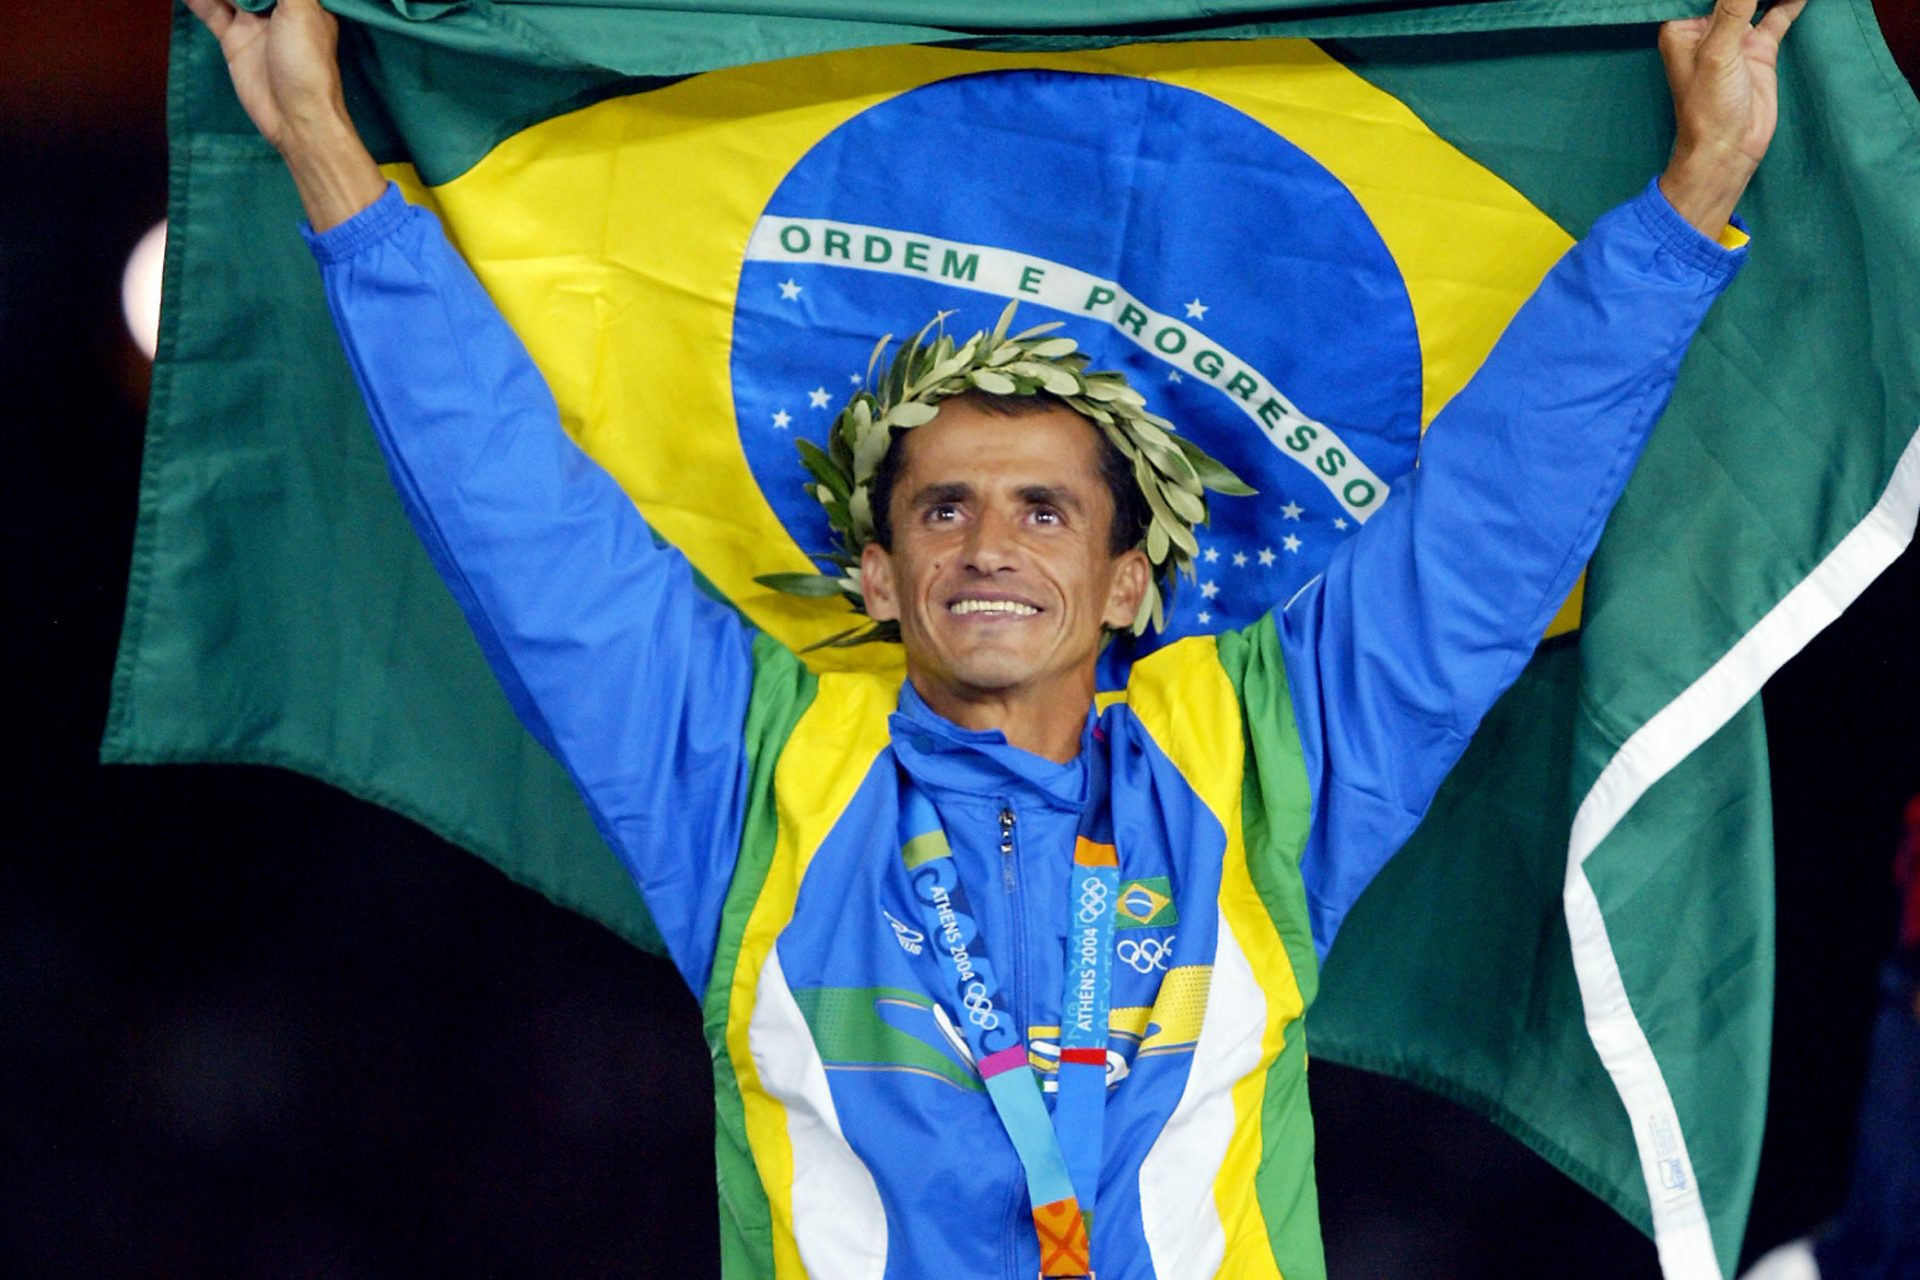 Vanderlei Lima was set to win the 2004 Olympic marathon, but what stopped him?